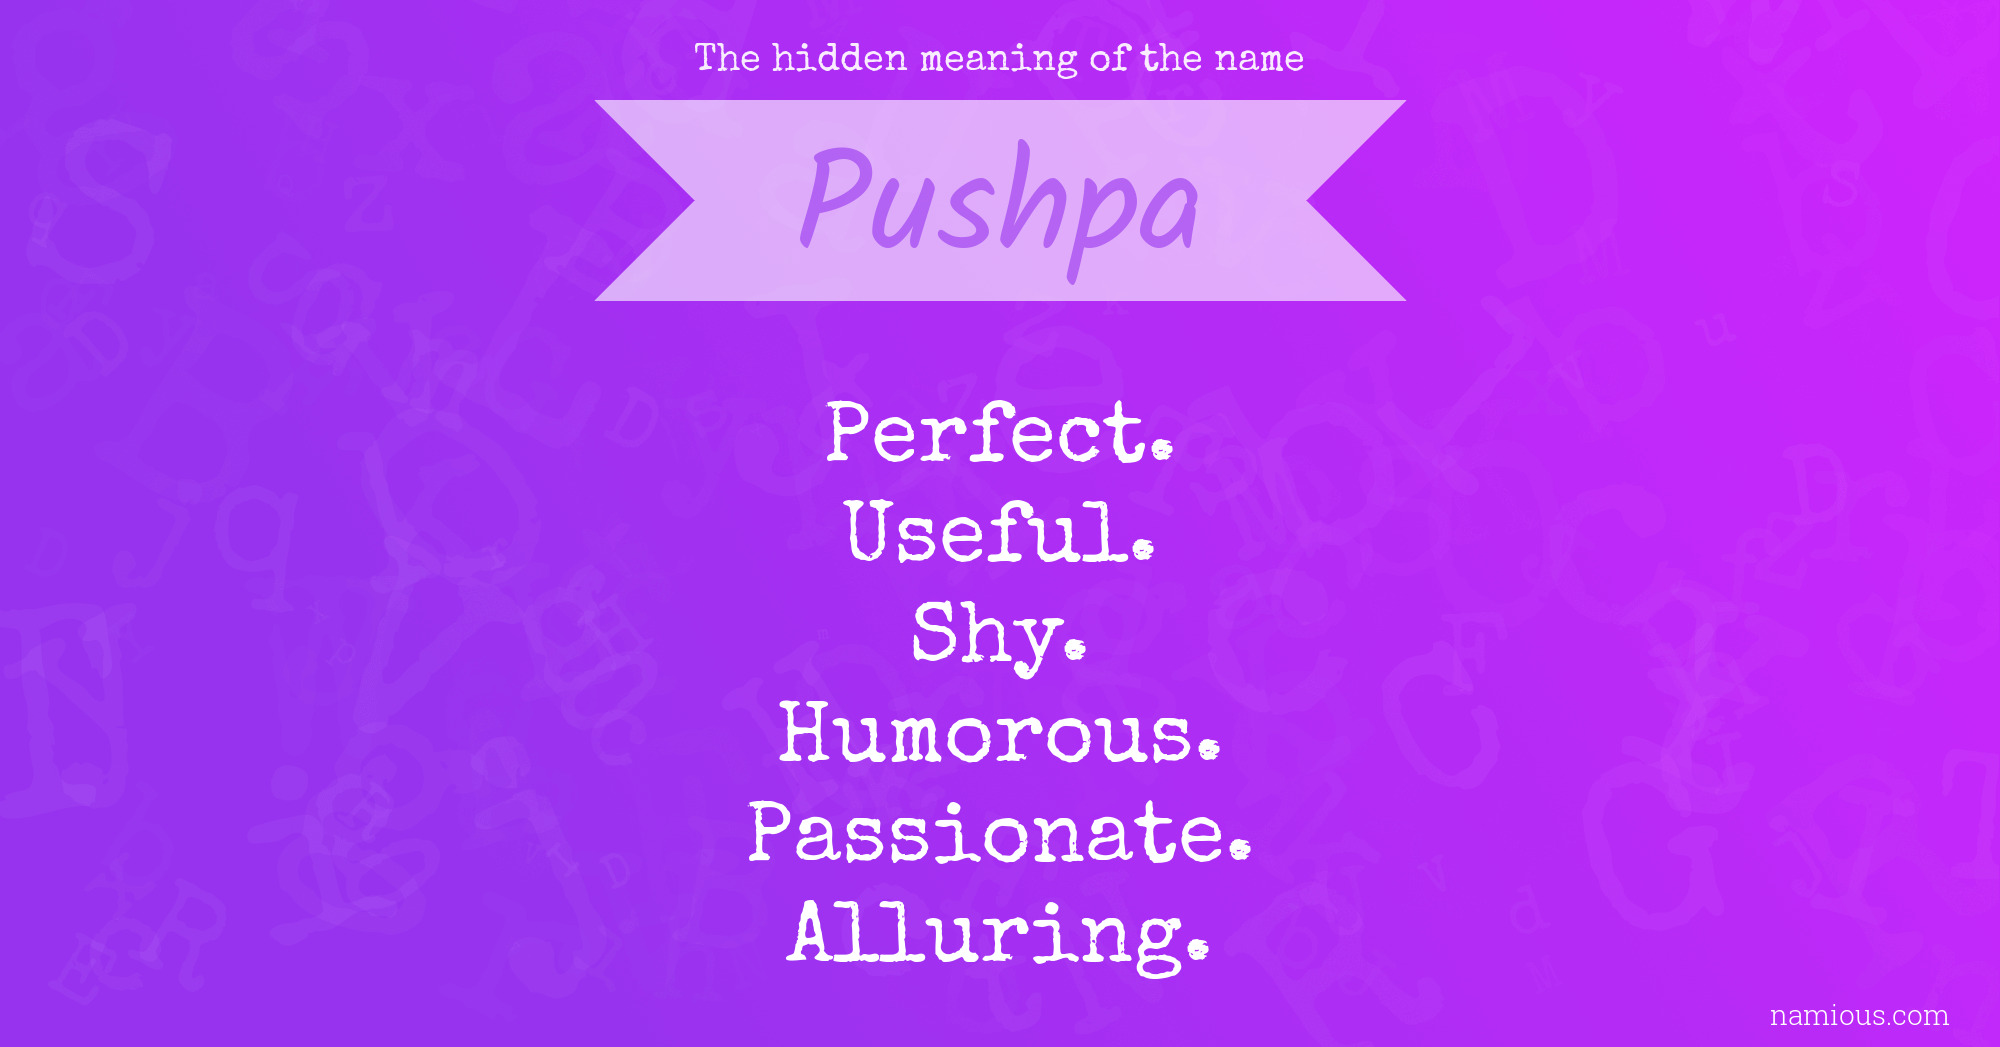 The hidden meaning of the name Pushpa